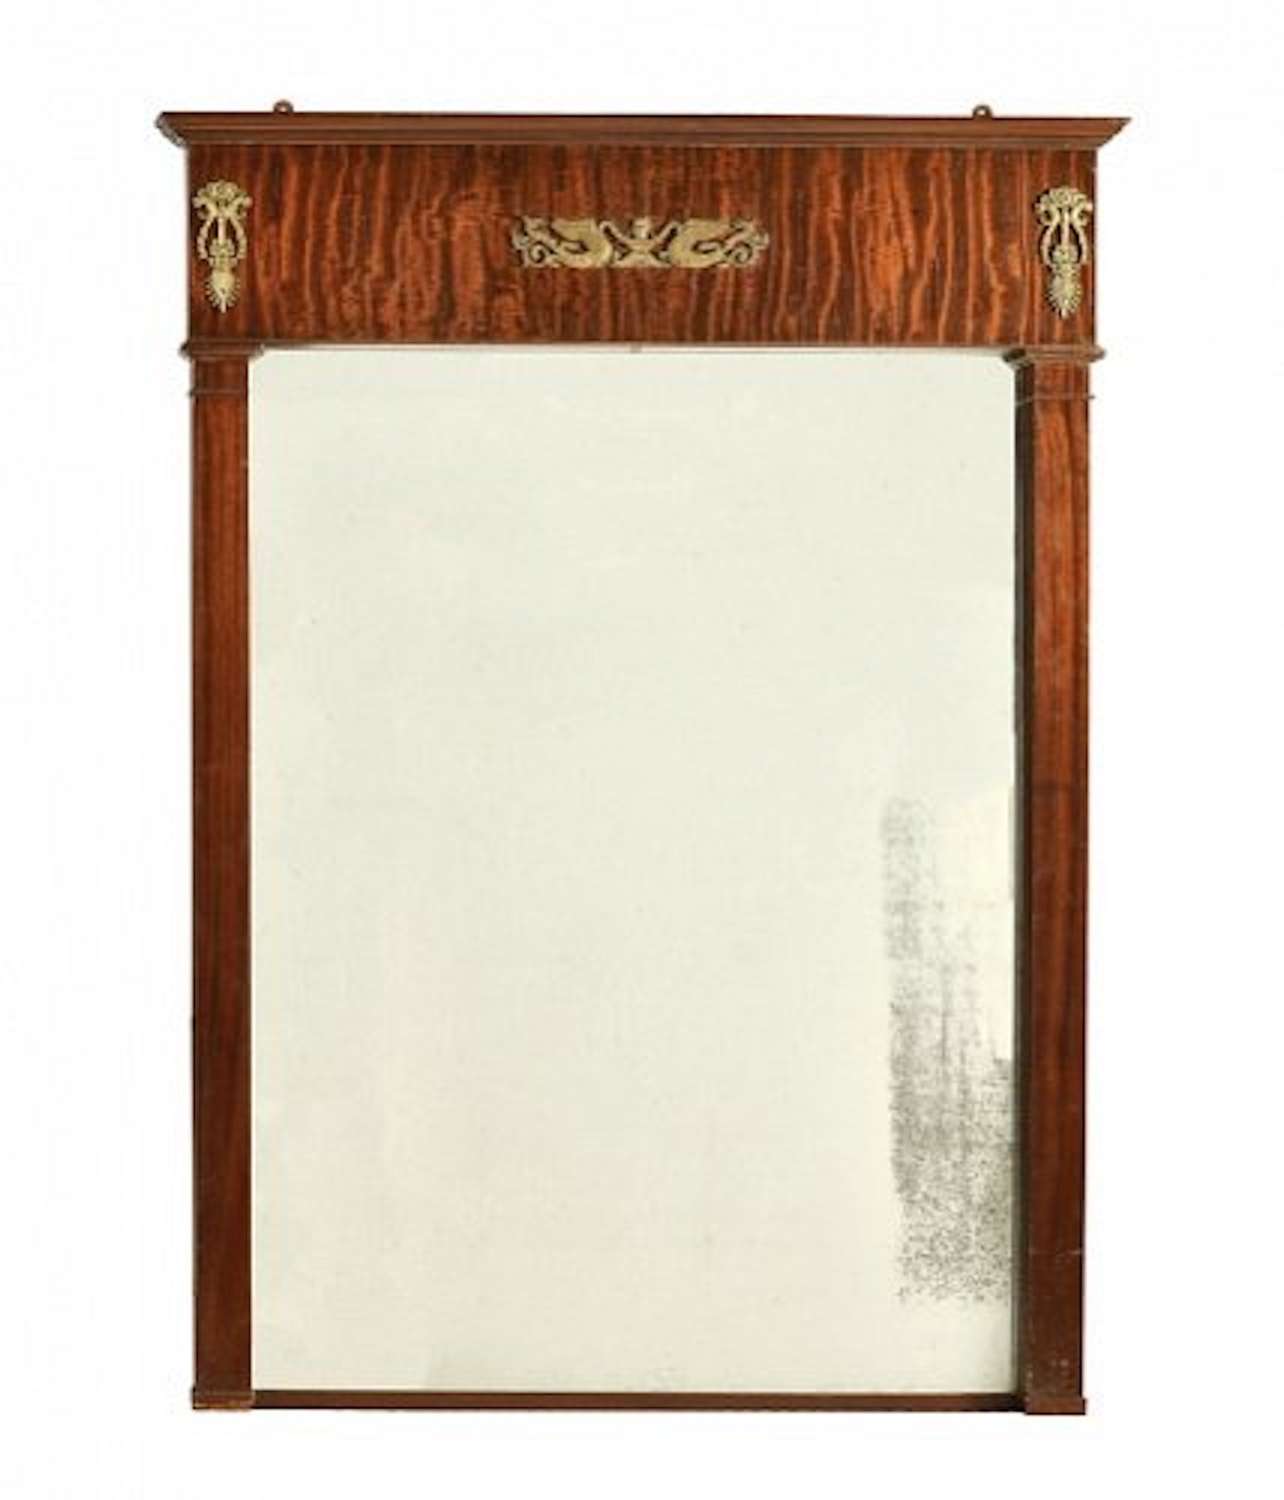 A Mahogany and Gilt Metal Large Wall Mirror in Empire Taste